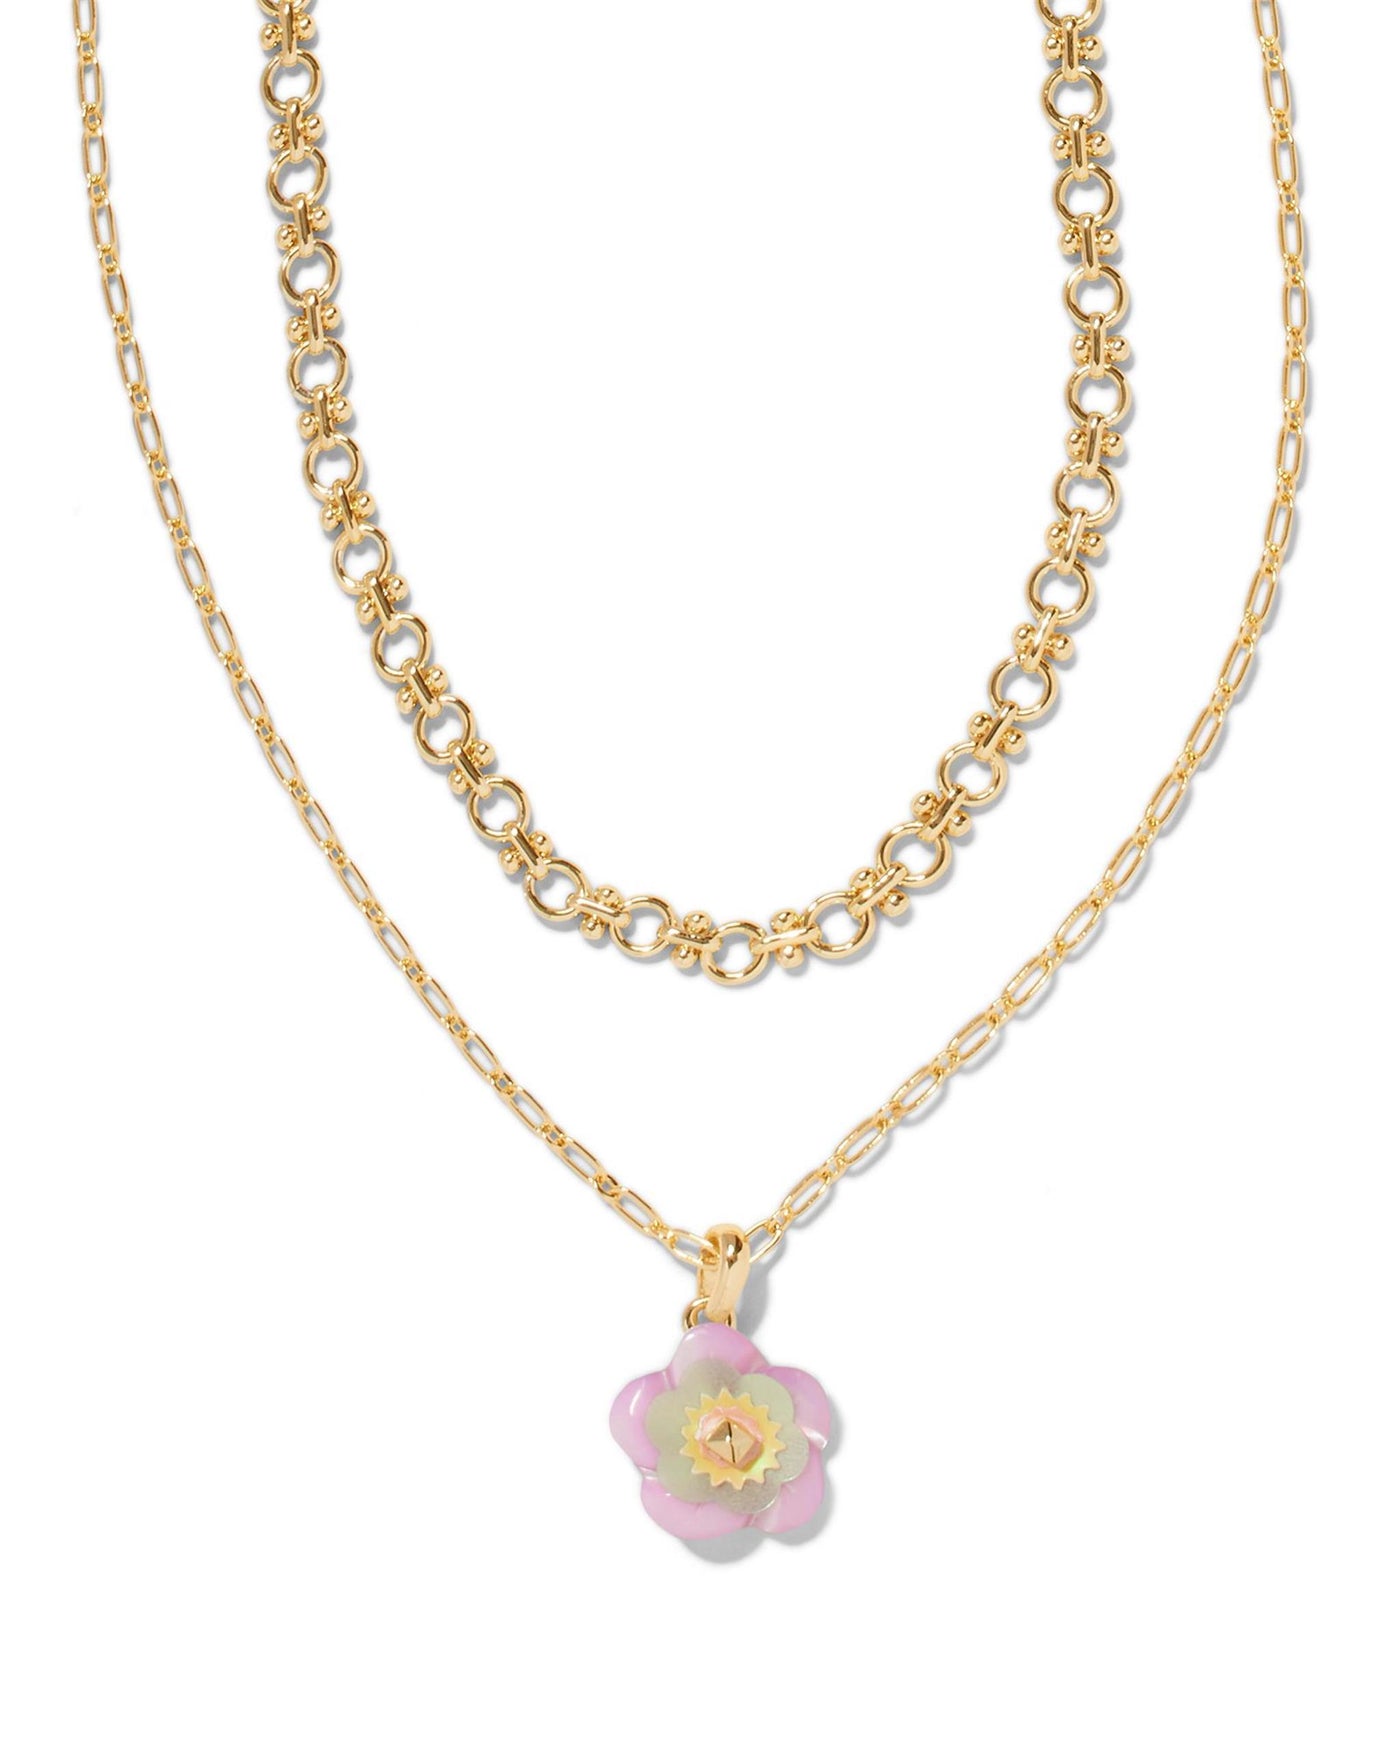 Gold Tone Floral Necklace by Kendra Scott